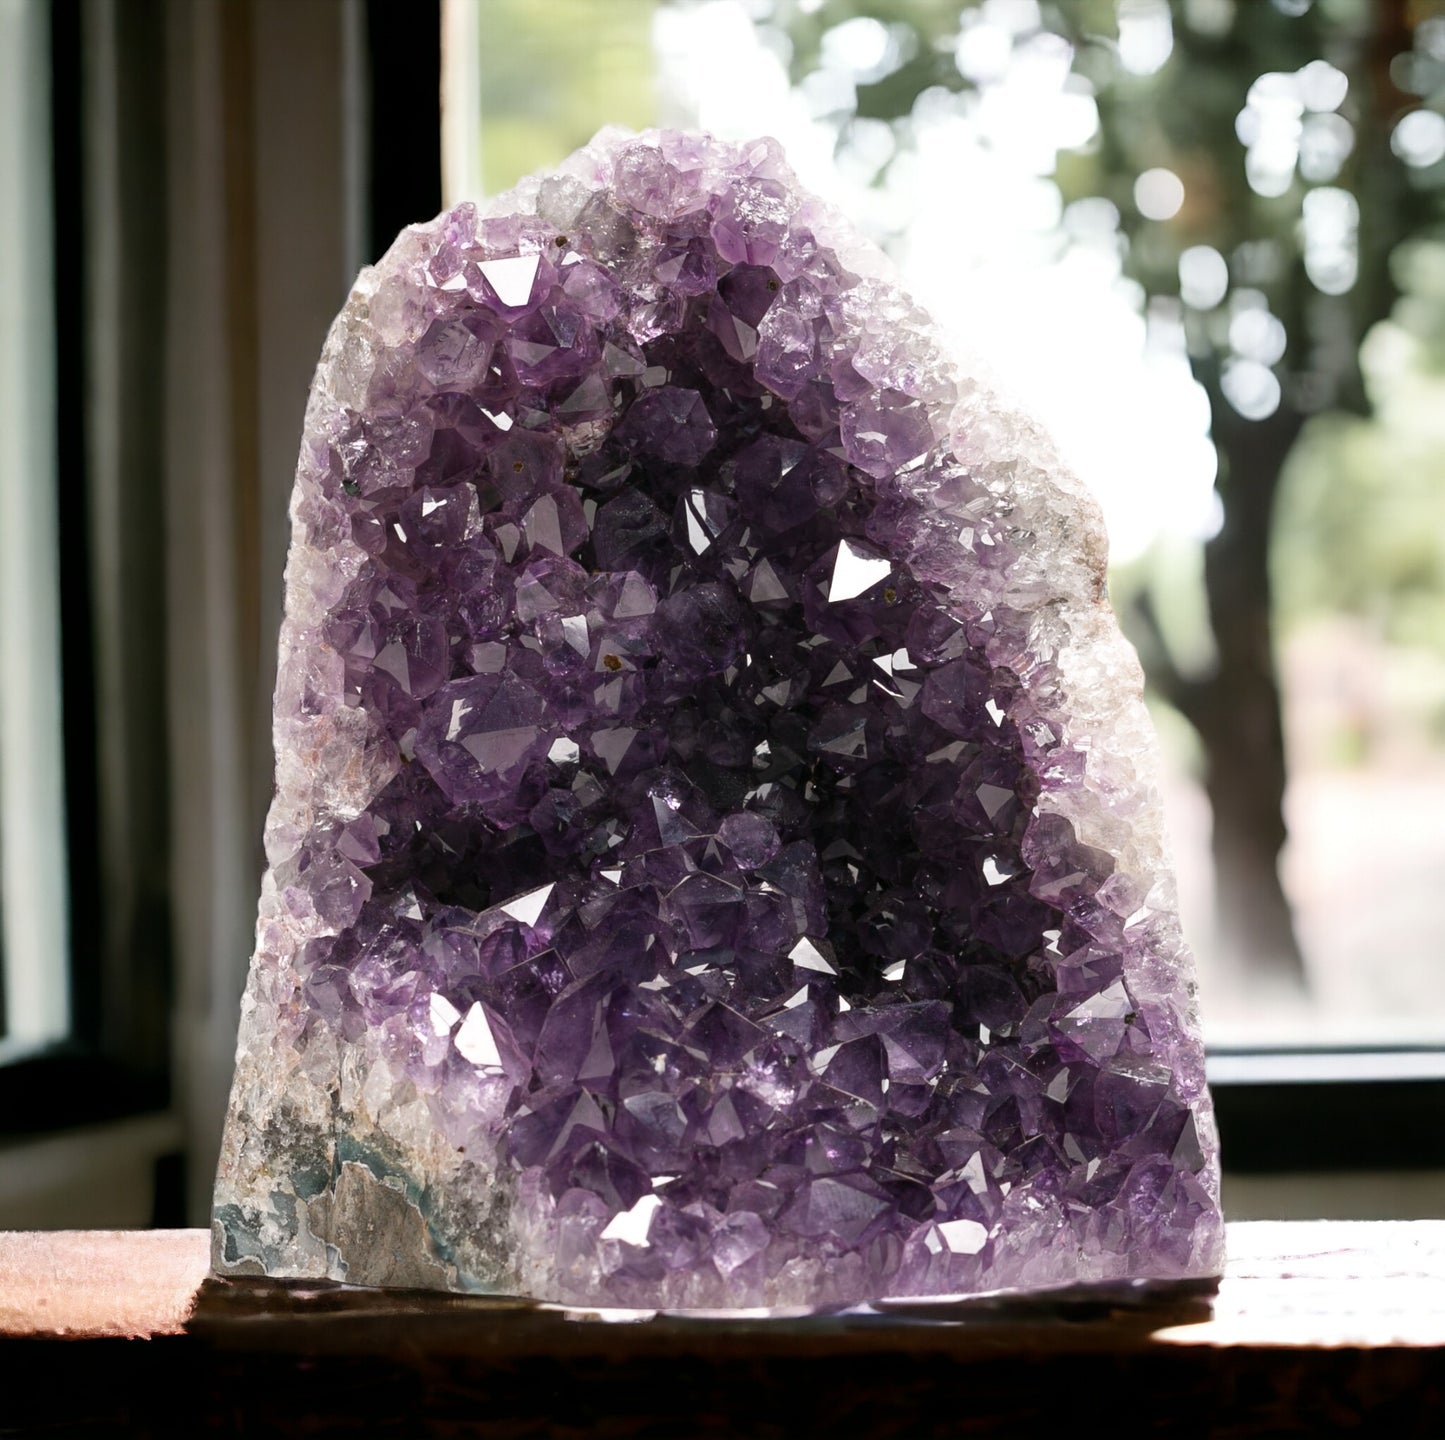 Deep Purple Natural Amethyst Crystal Clusters (2 lb to 3 lb) from Uruguay Raw Geode Quartz